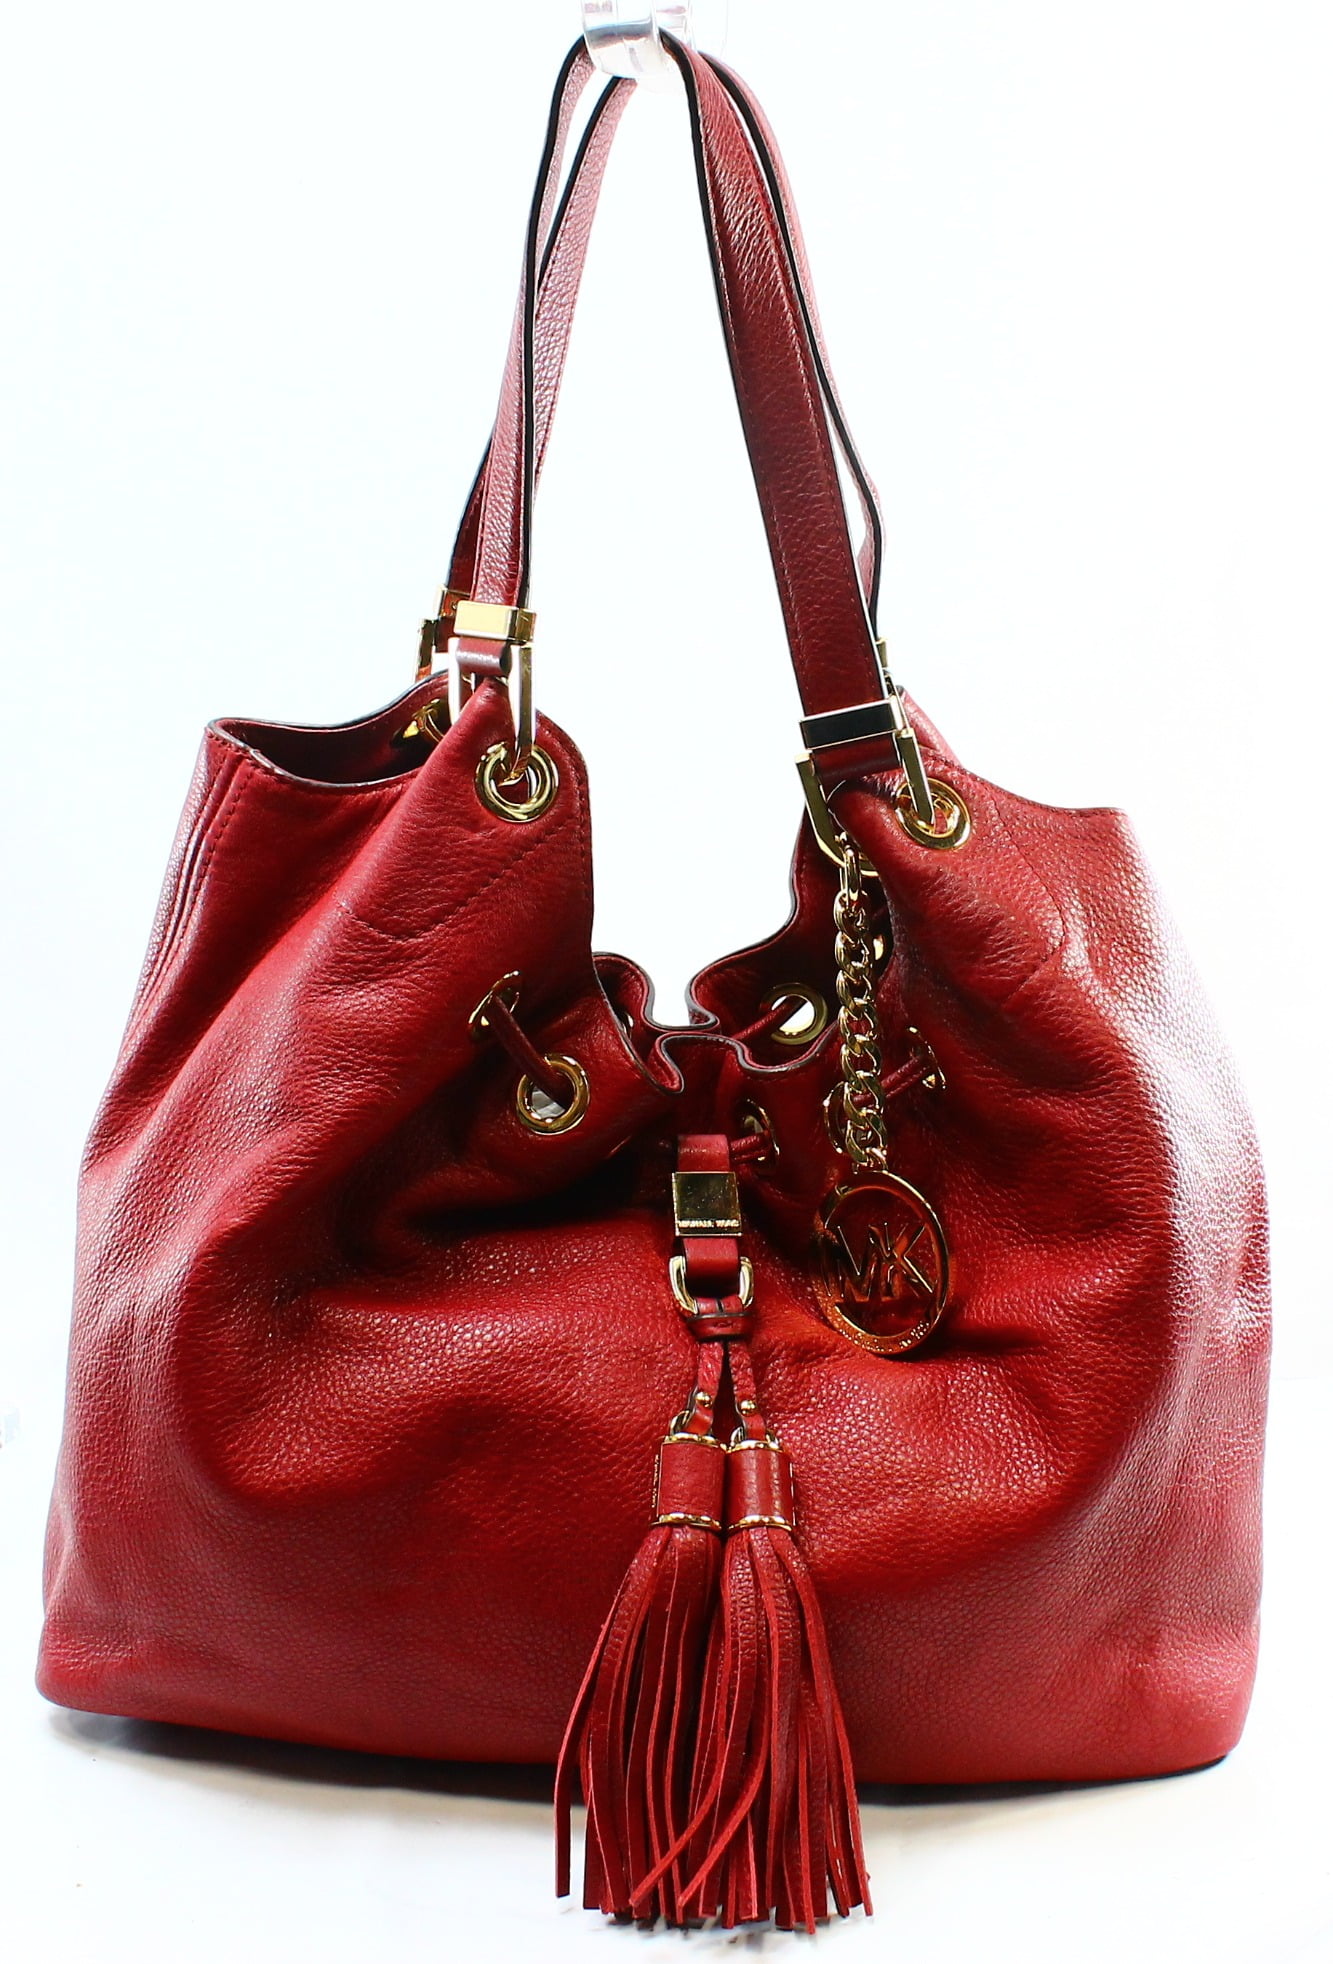 michael kors red leather purse